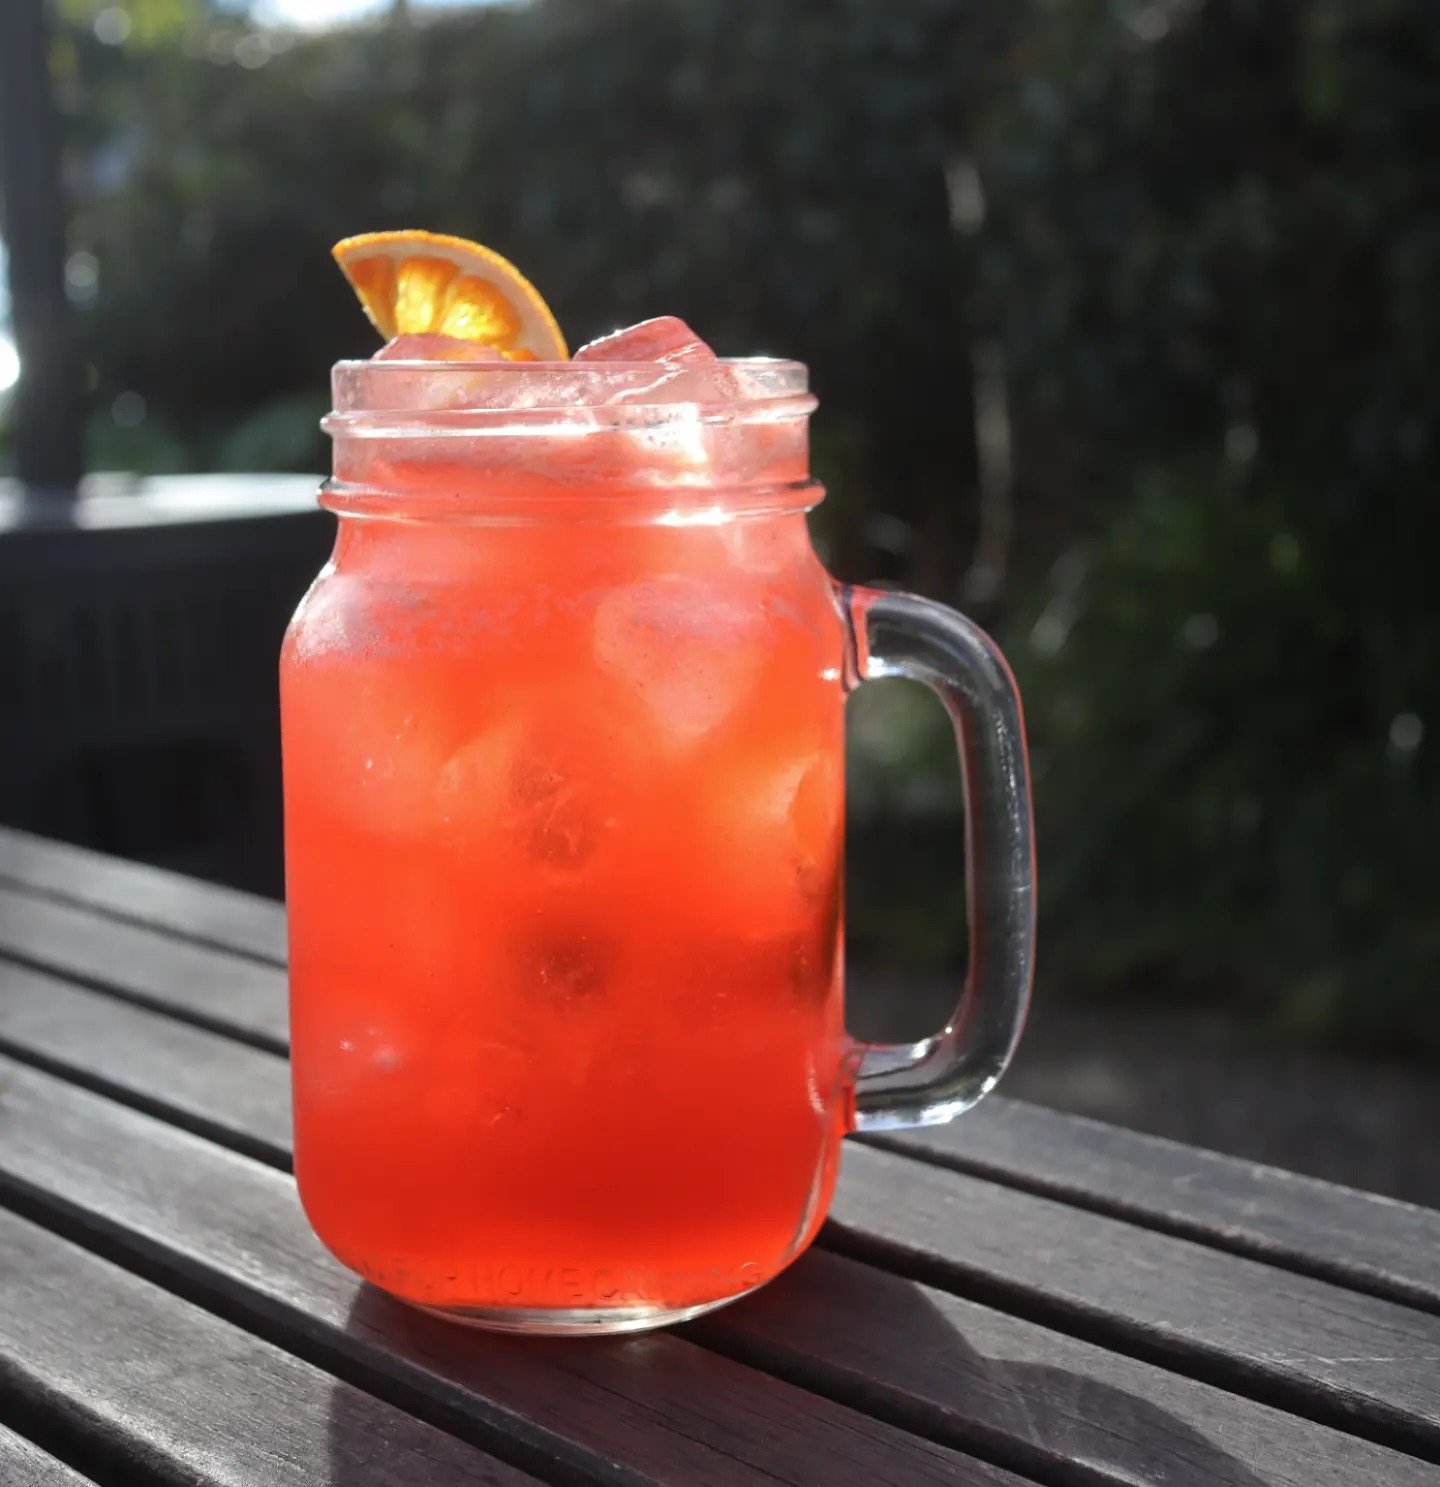 Our new cocktail of the month is here! 

🐵 JAI'S JUNGLE JUICE 🌴
A delicious blend of passionfruit, strawberry, lime and lemonade. 

Come in and try one before they're gone. This special will only be available for the month of May.

#starhotelsale #